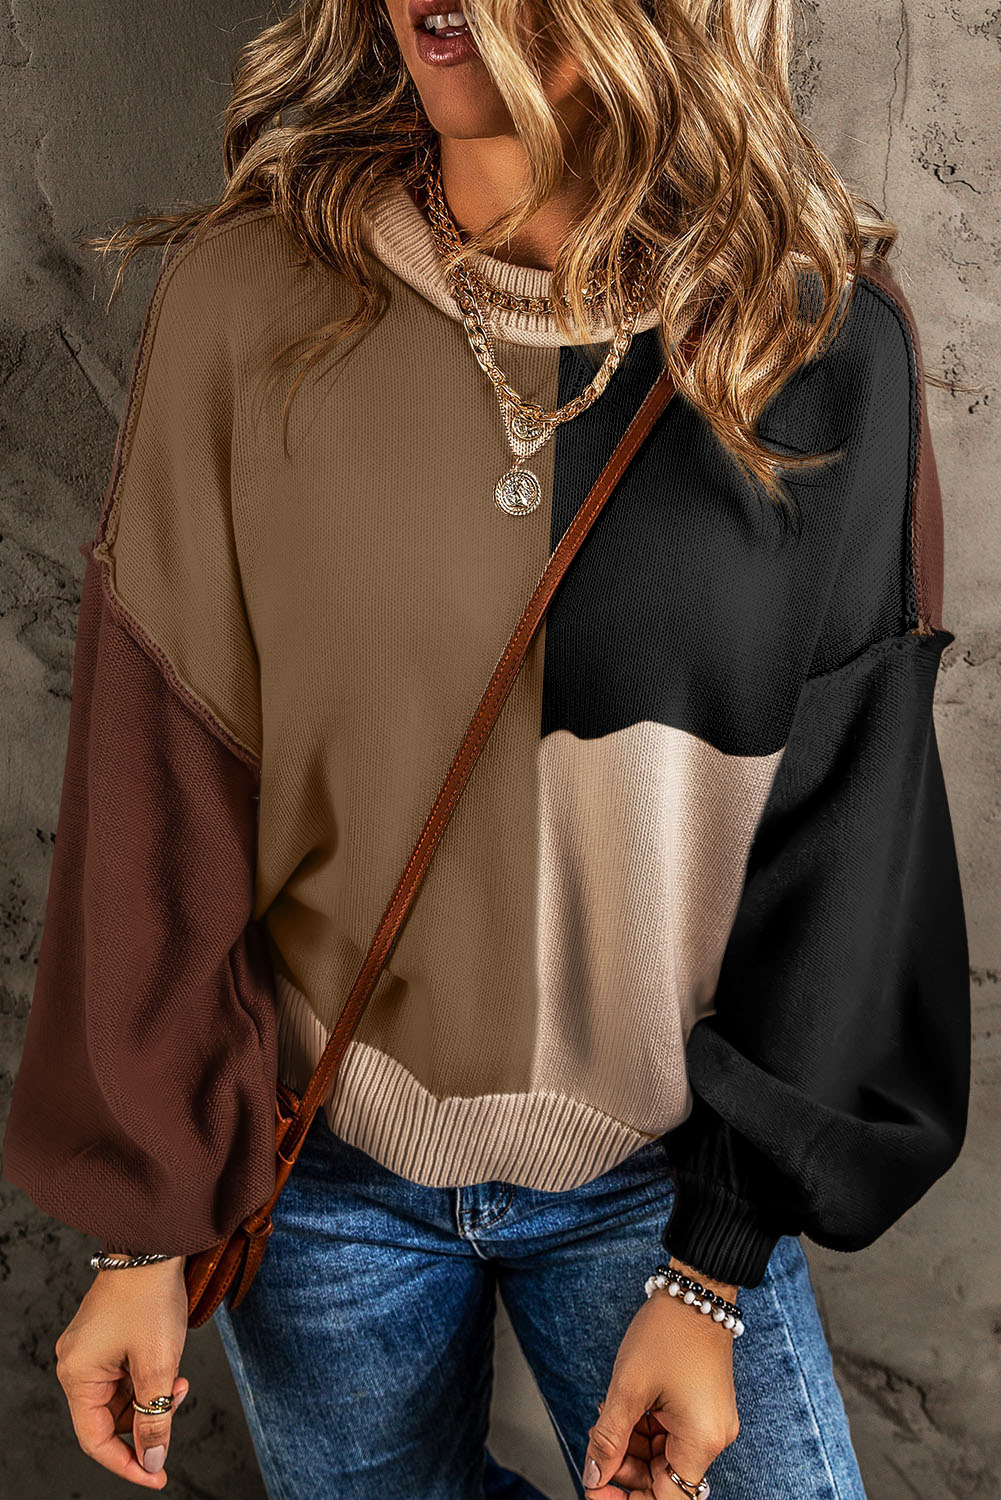 Shewin Wholesale Clothing Vendors Chicory Coffee Colorblock Exposed Seam BALLOON Sleeve Sweater